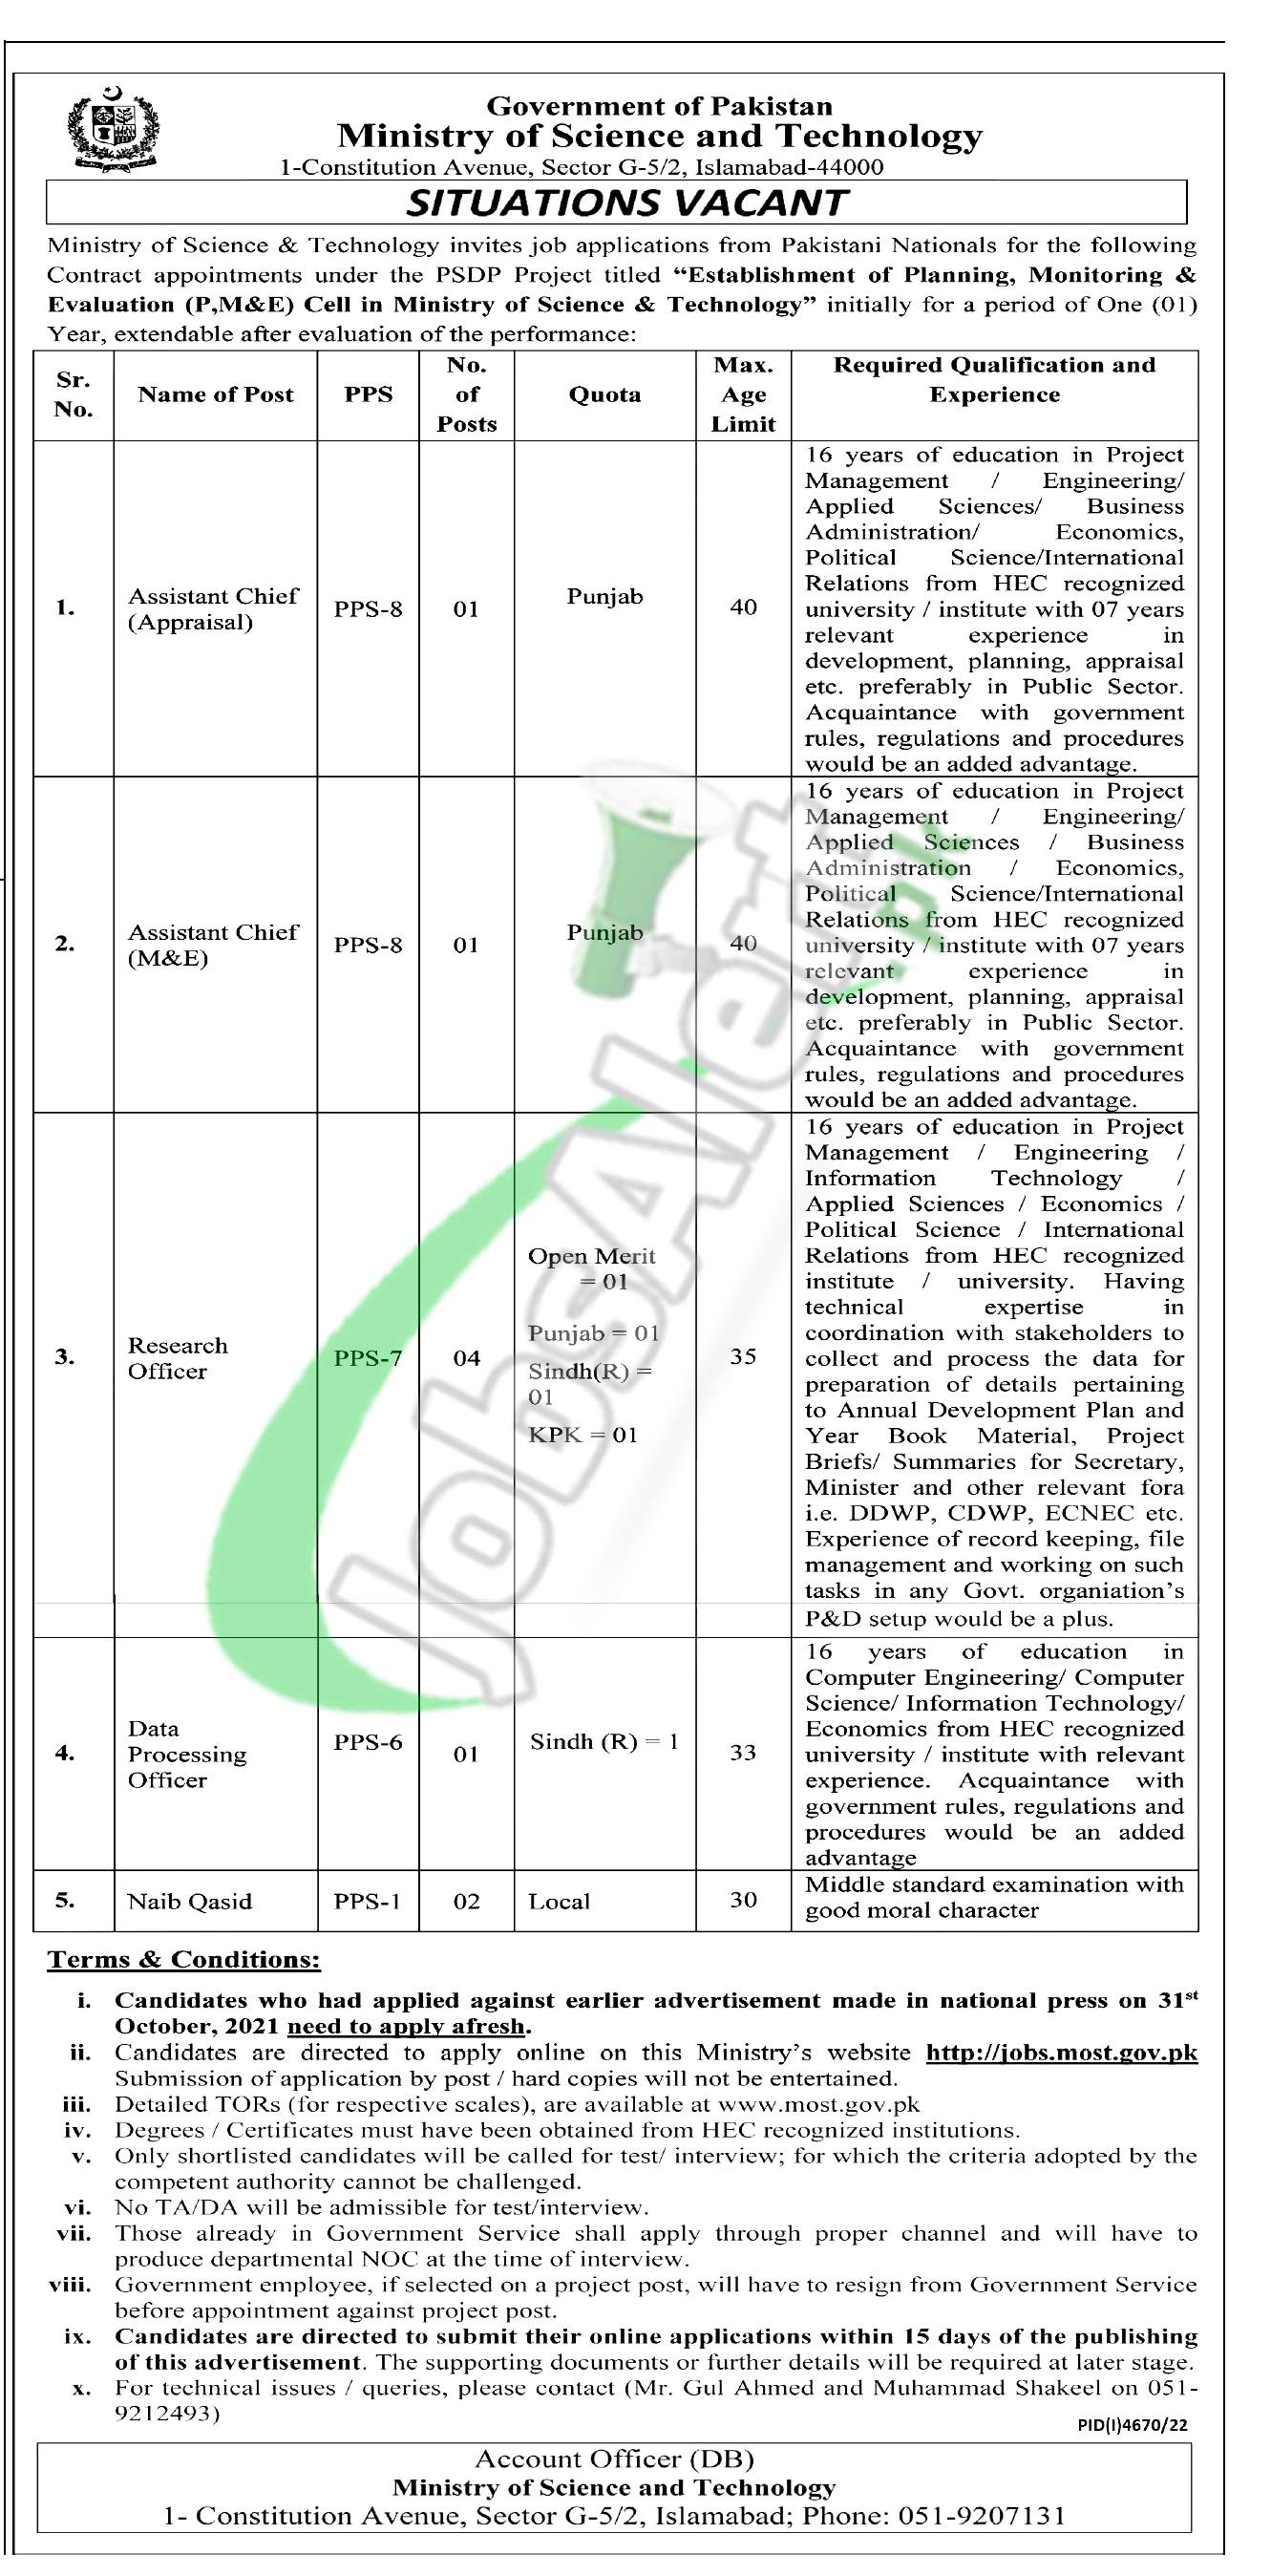 Ministry of Science & Technology Jobs